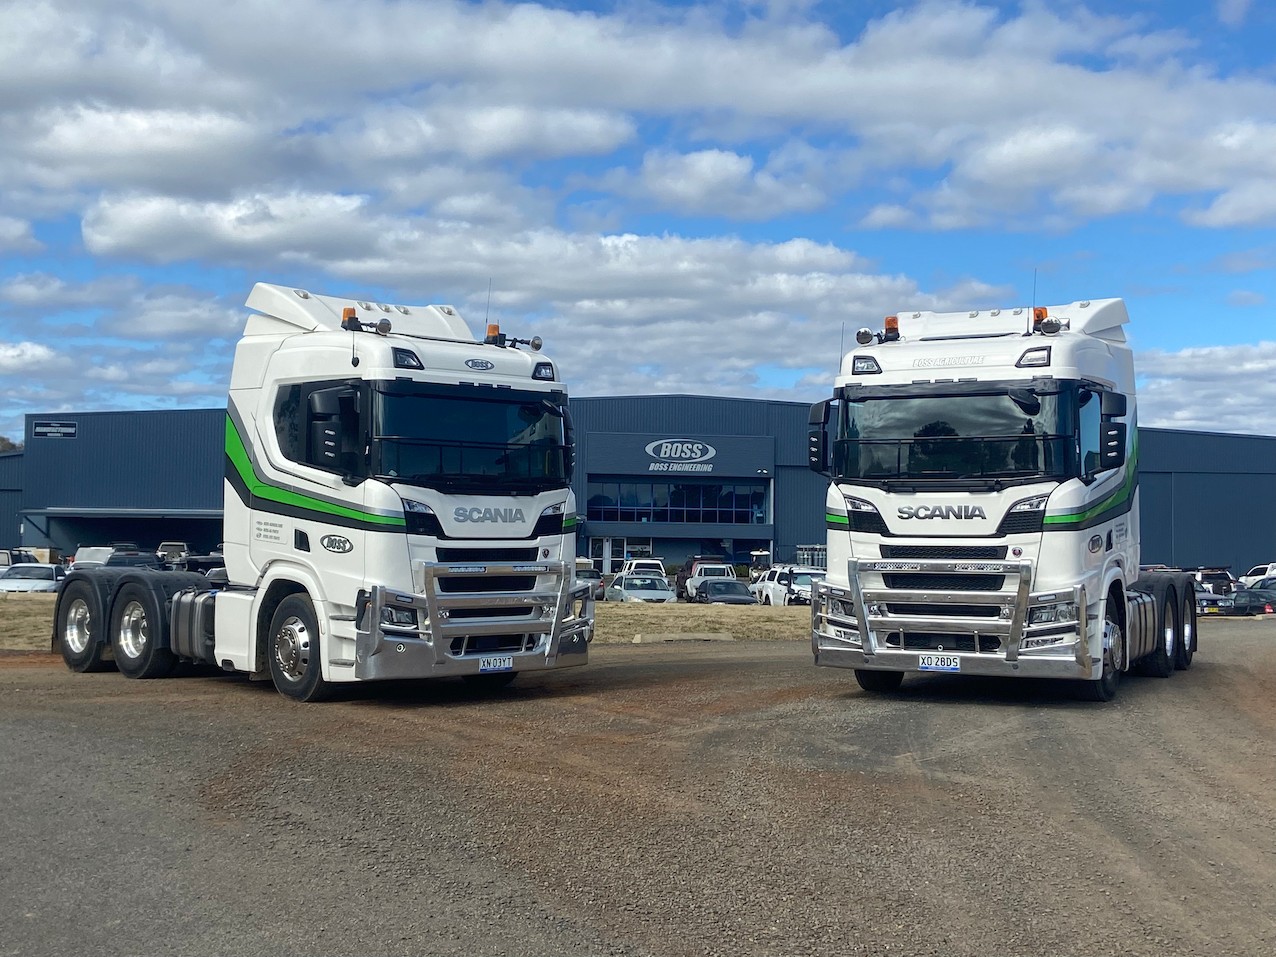 Scania drives the cream of the crop